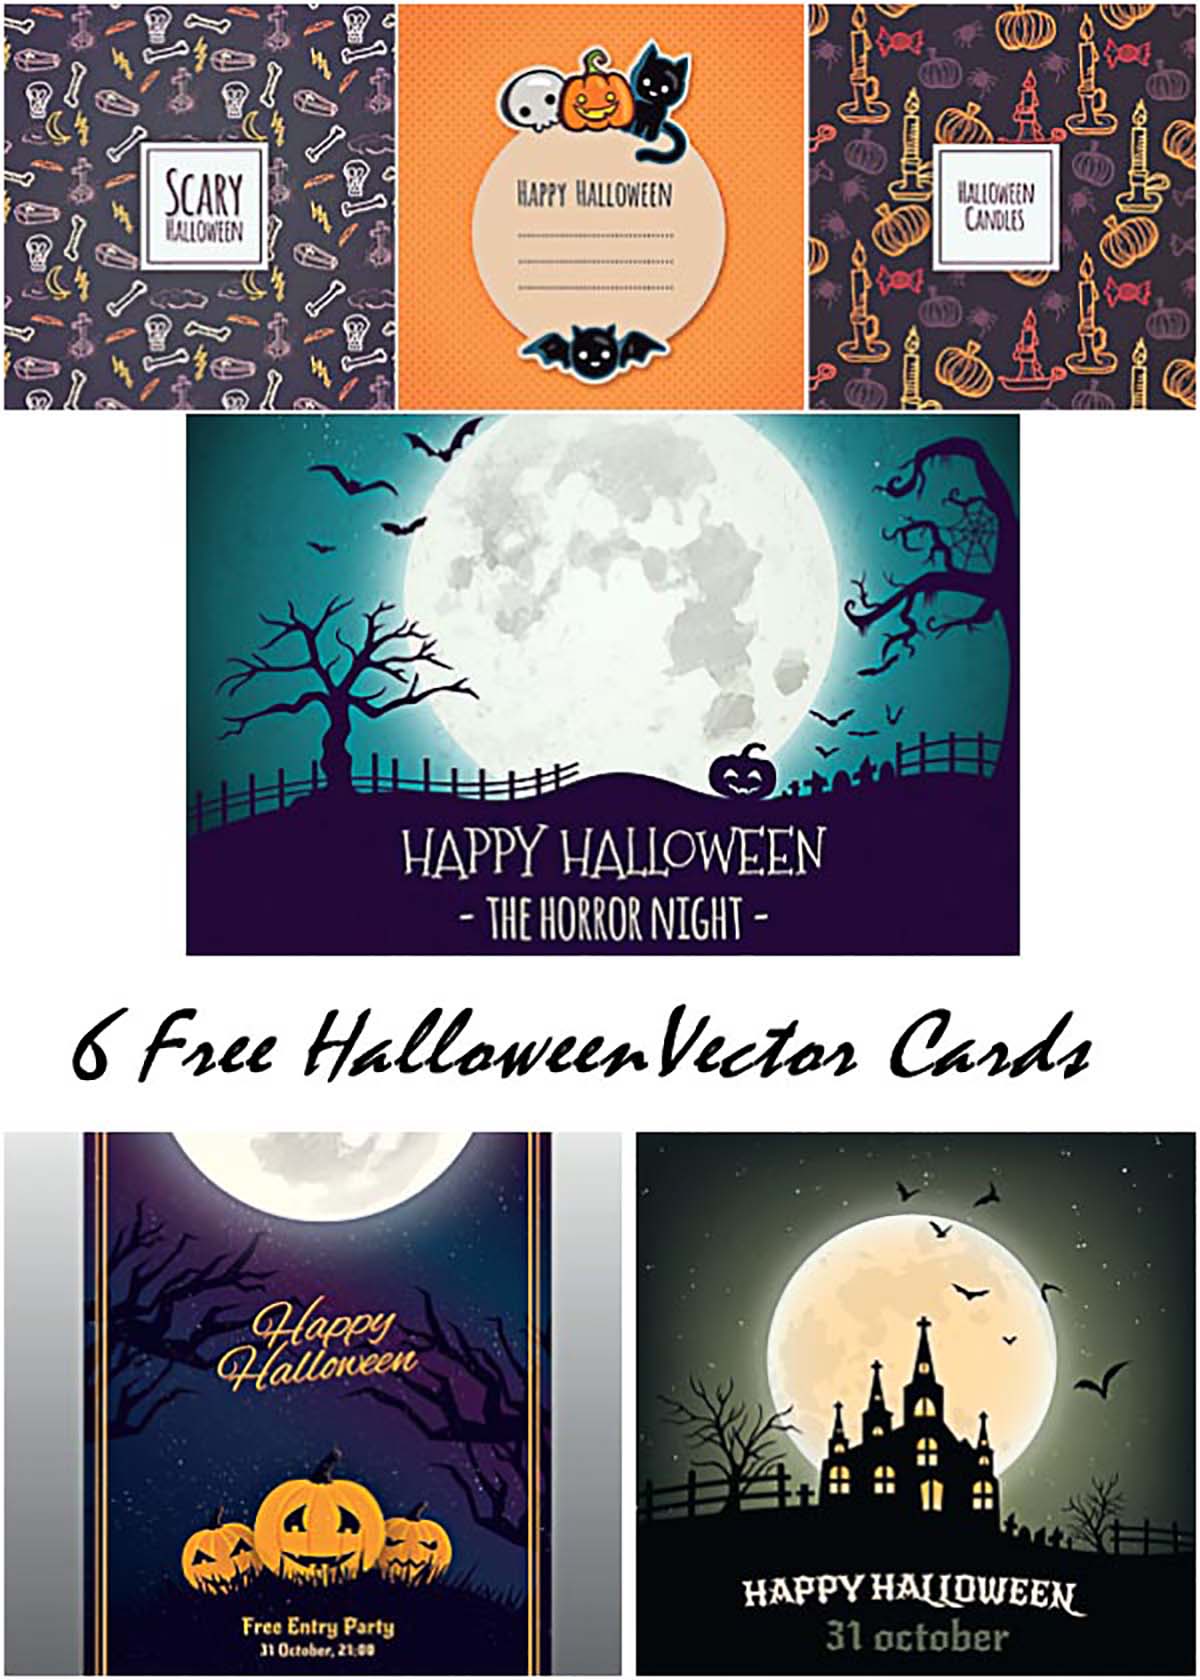 Grungy Halloween backgrounds with spooky full moon